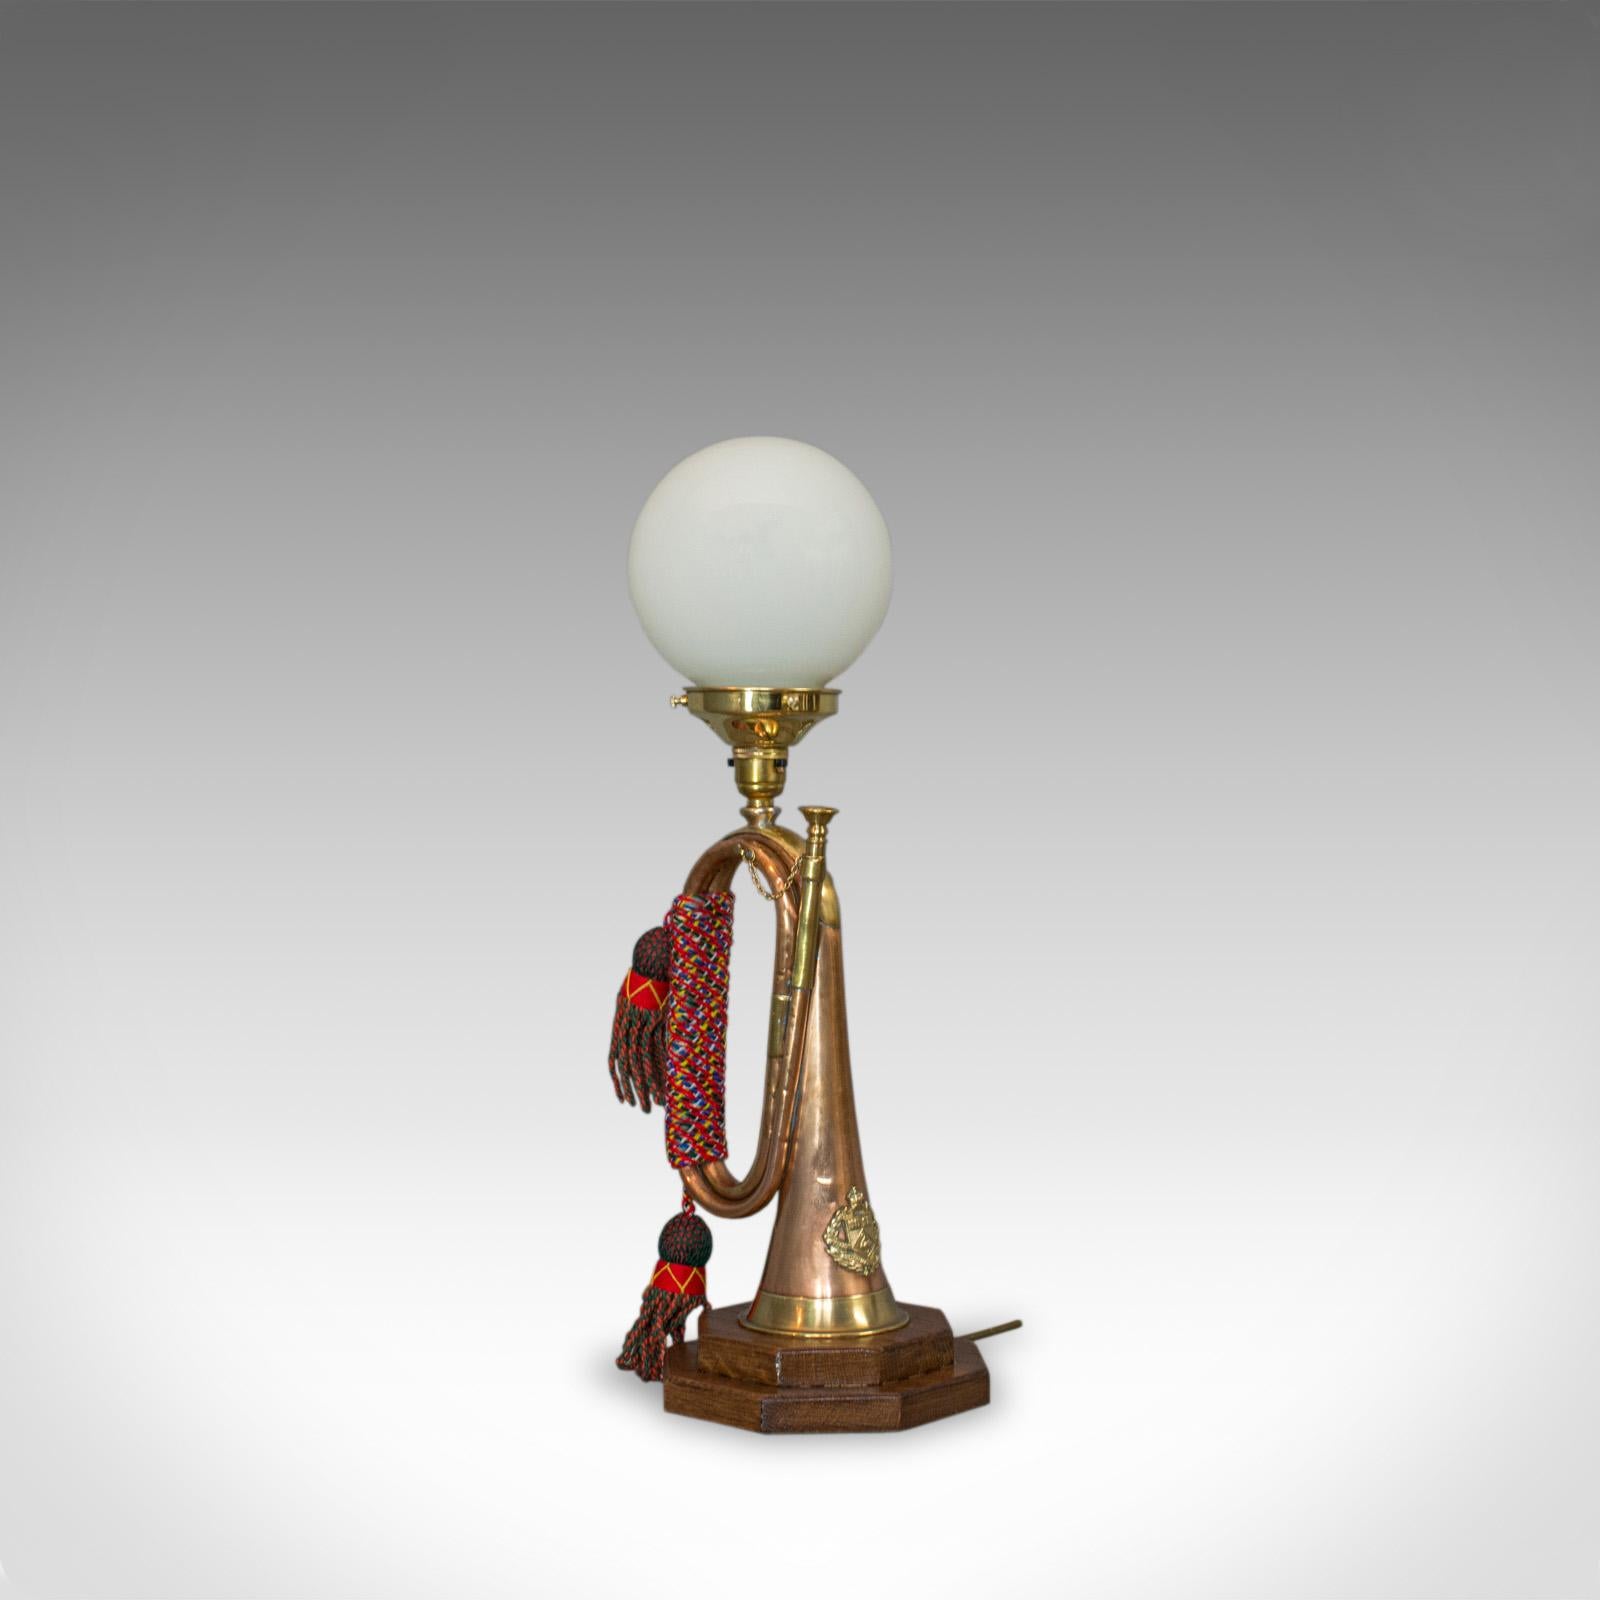 This is a vintage bugle lamp. An English, copper and oak military musical instrument, with a bespoke, handcrafted table light fitting and glass shade.

In excellent condition, fully working with quality, opaque pendant lamp shade
Bears the